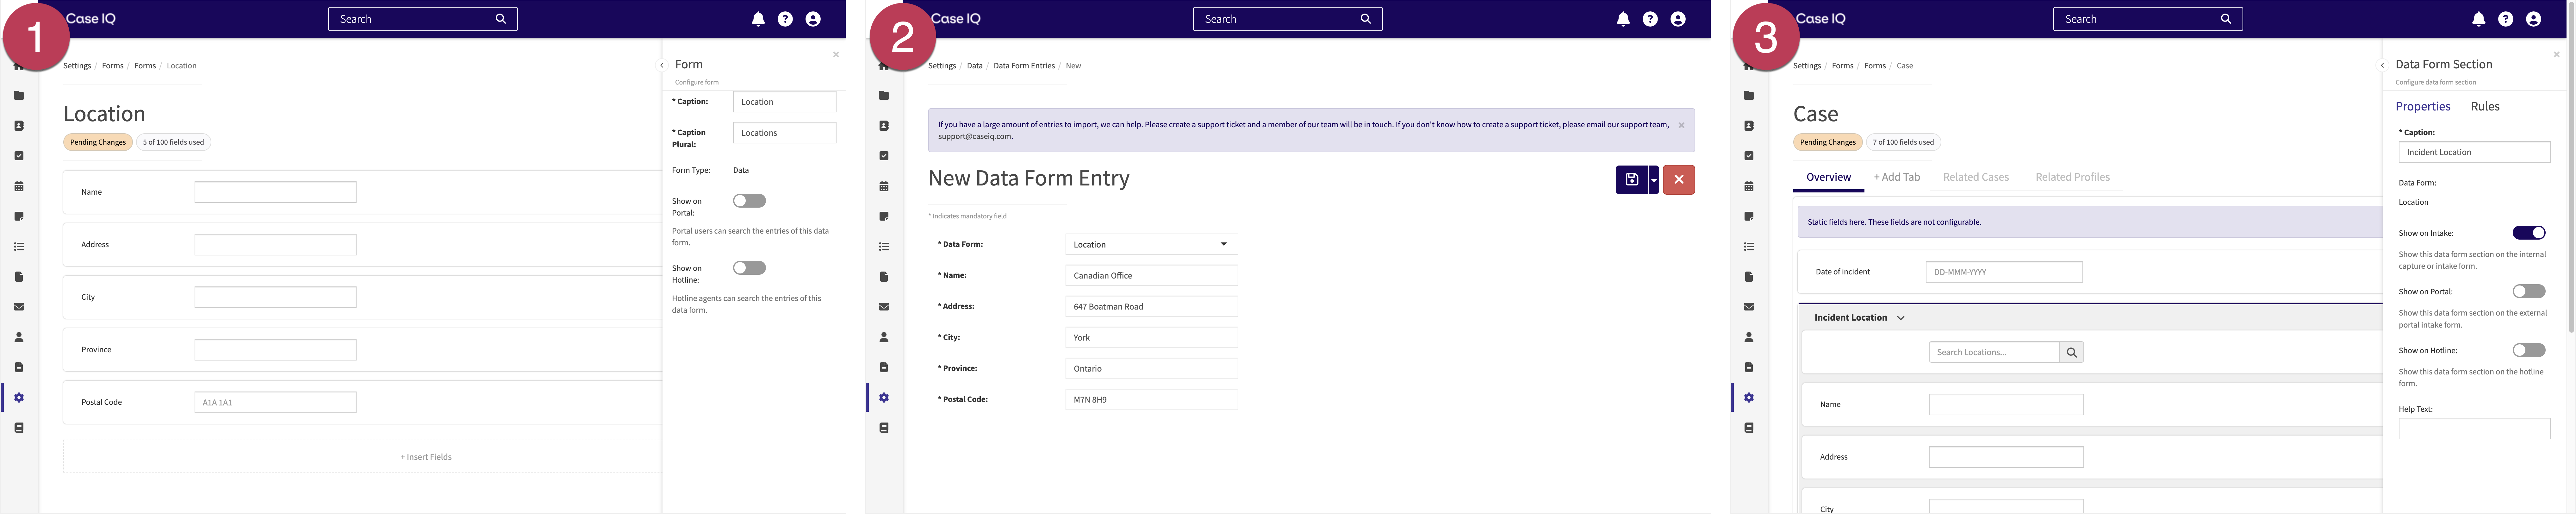 Three screenshots showing the following: 1) adding a data form, 2) adding data form entries, and 3) adding a data form section to the case form.